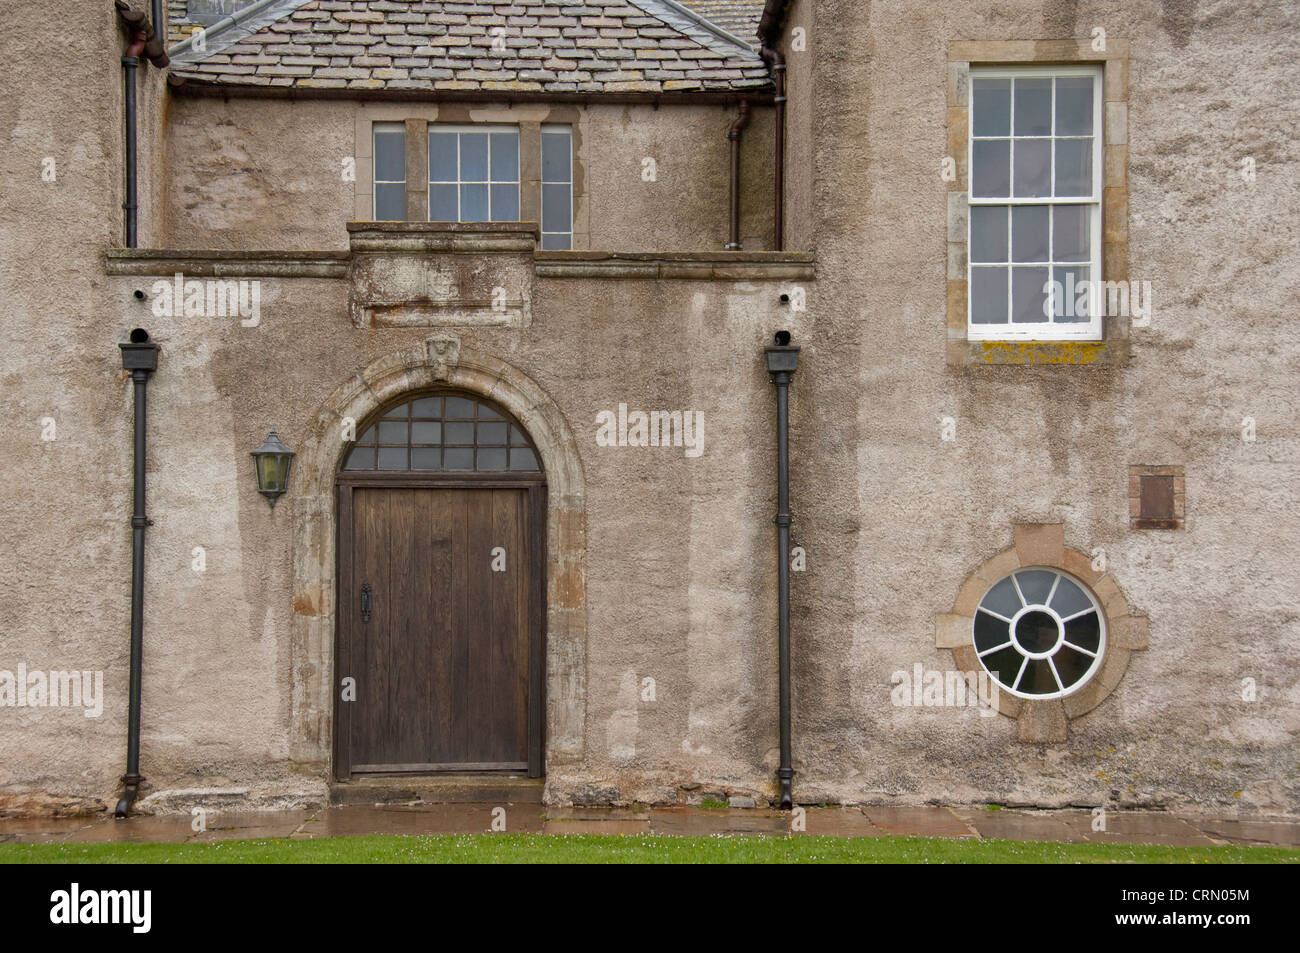 Scotland, Orkney Islands, Mainland, Stromness. Skaill House, finest 17th century mansion in Orkney, c. 1620. Stock Photo